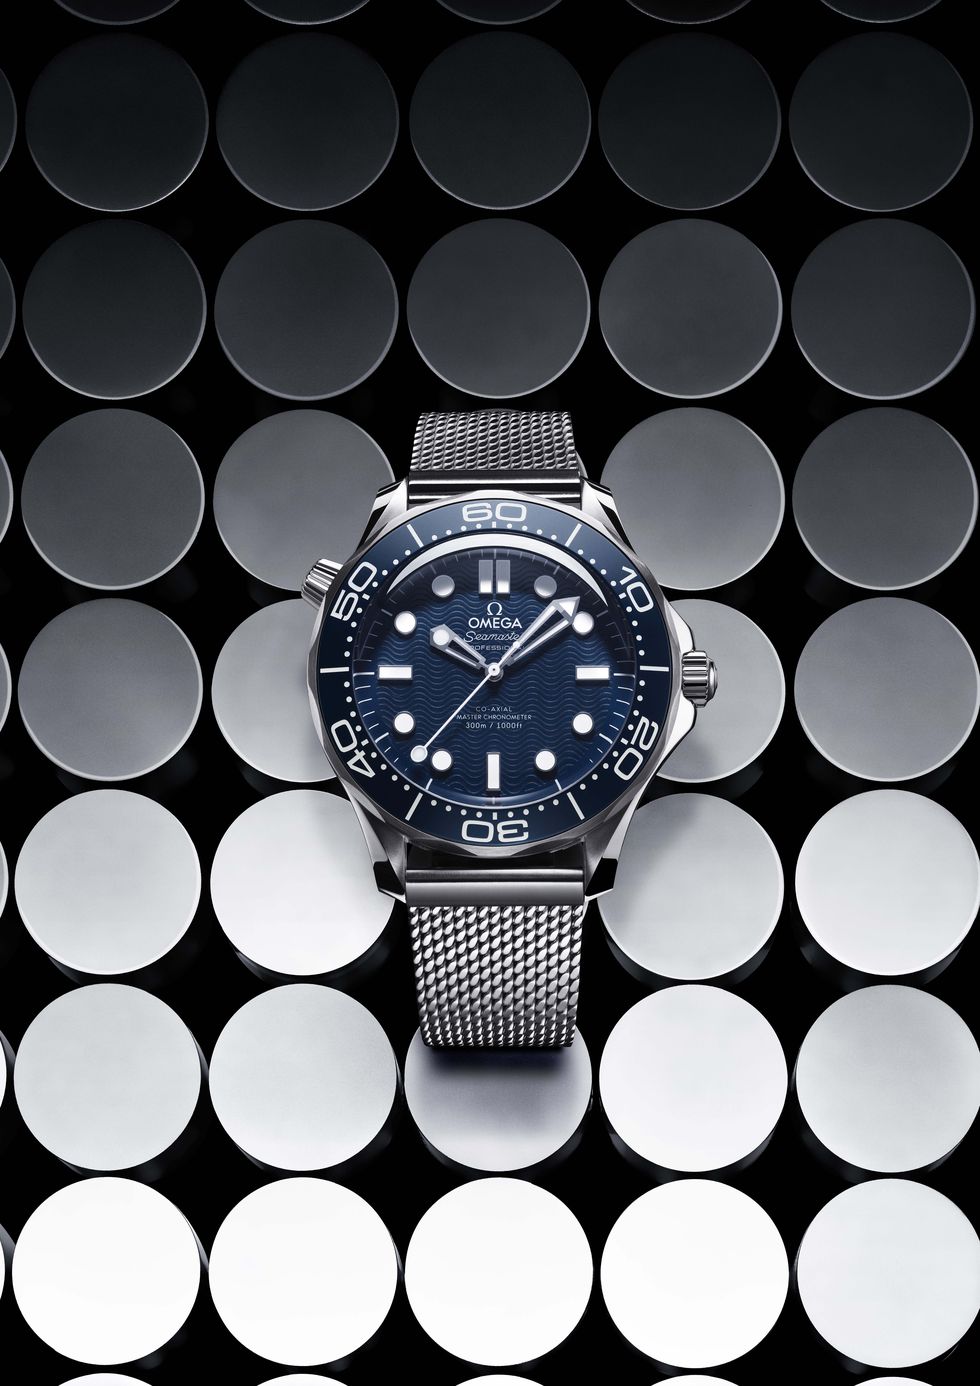 Omega Launches Stunning 60th Anniversary James Bond Watch